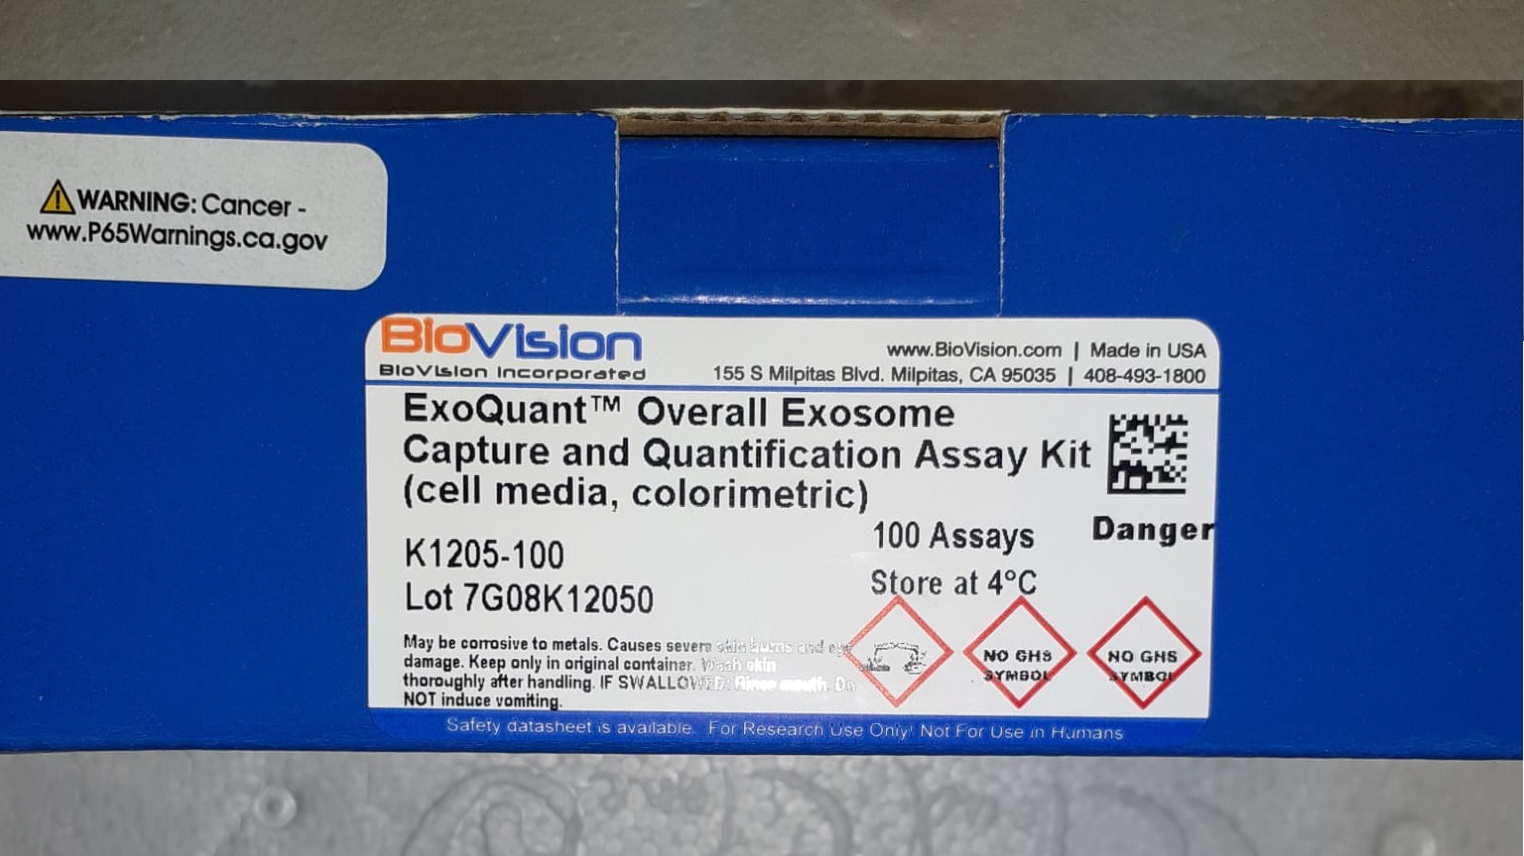 Exosome Capture and Quantification Assay Kit